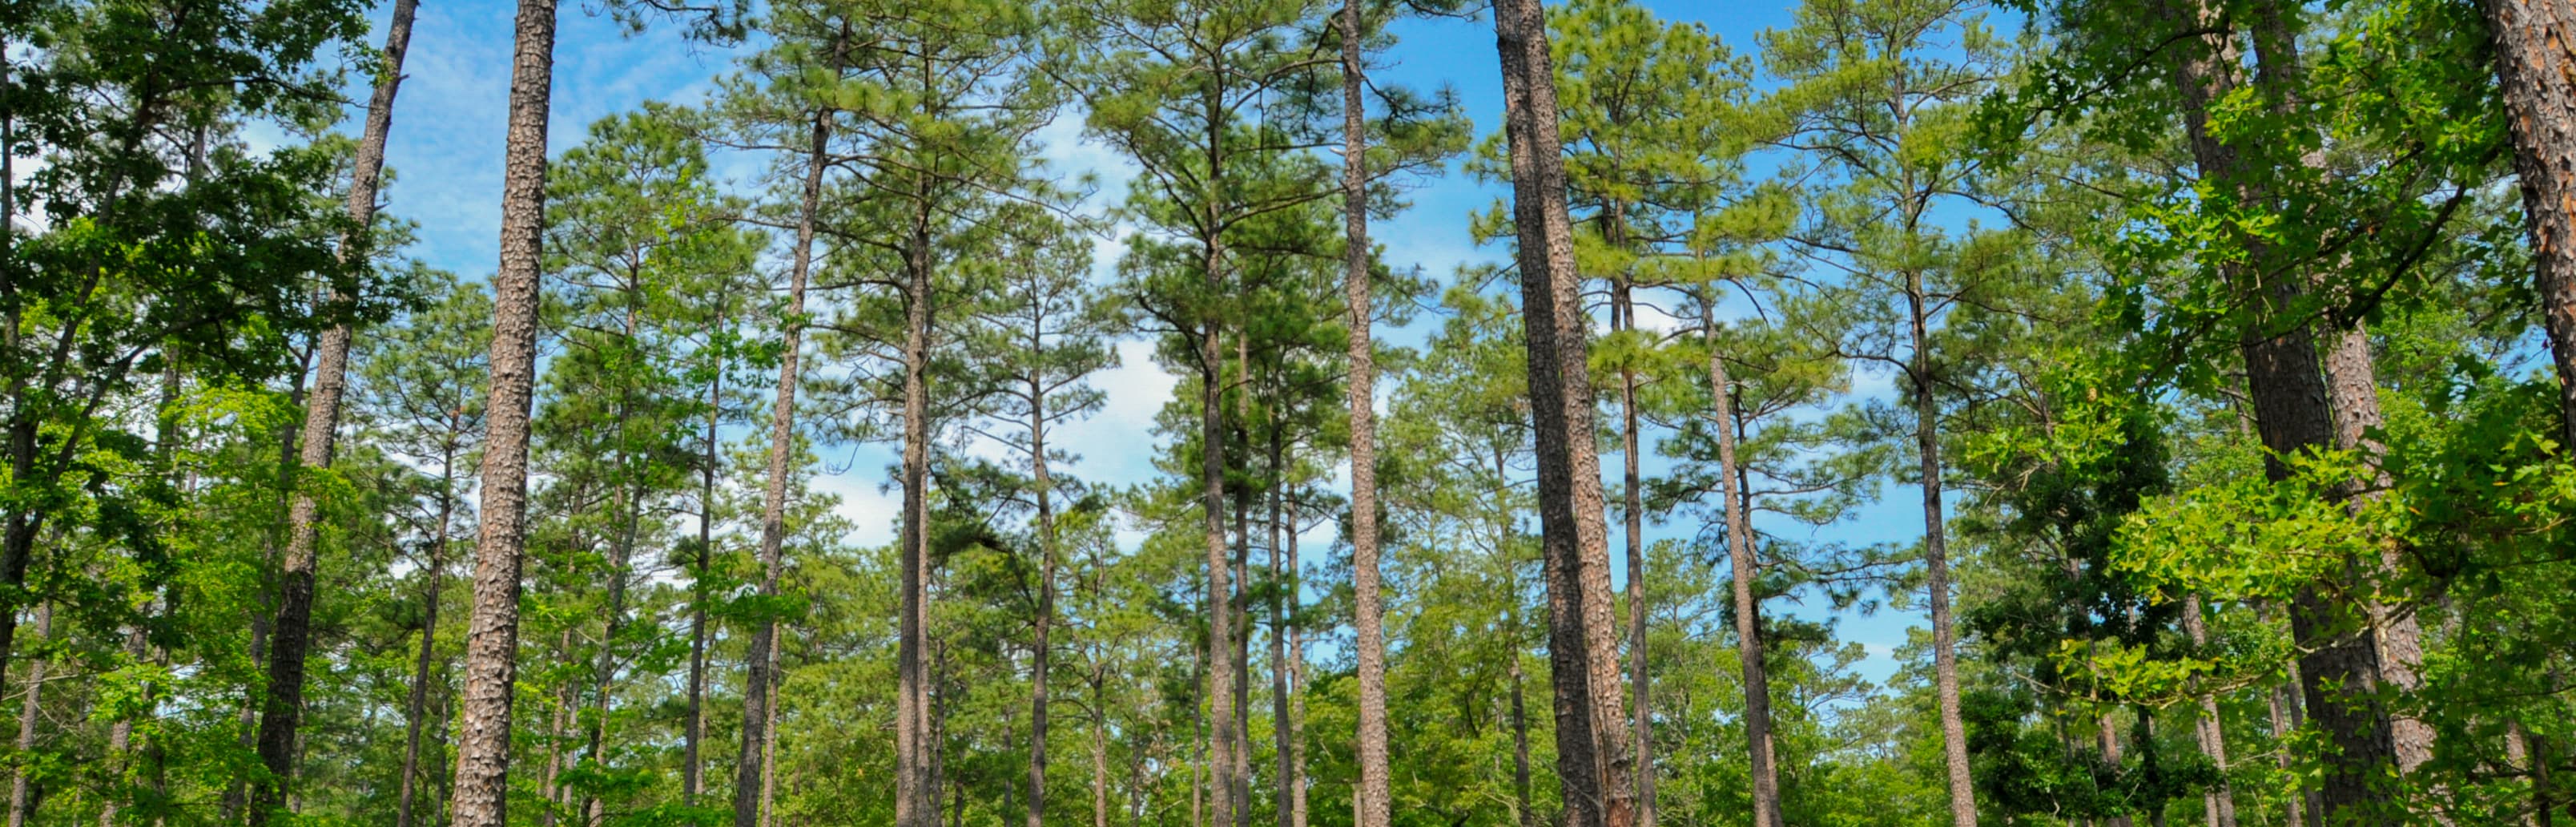 forest of pines and blue sky